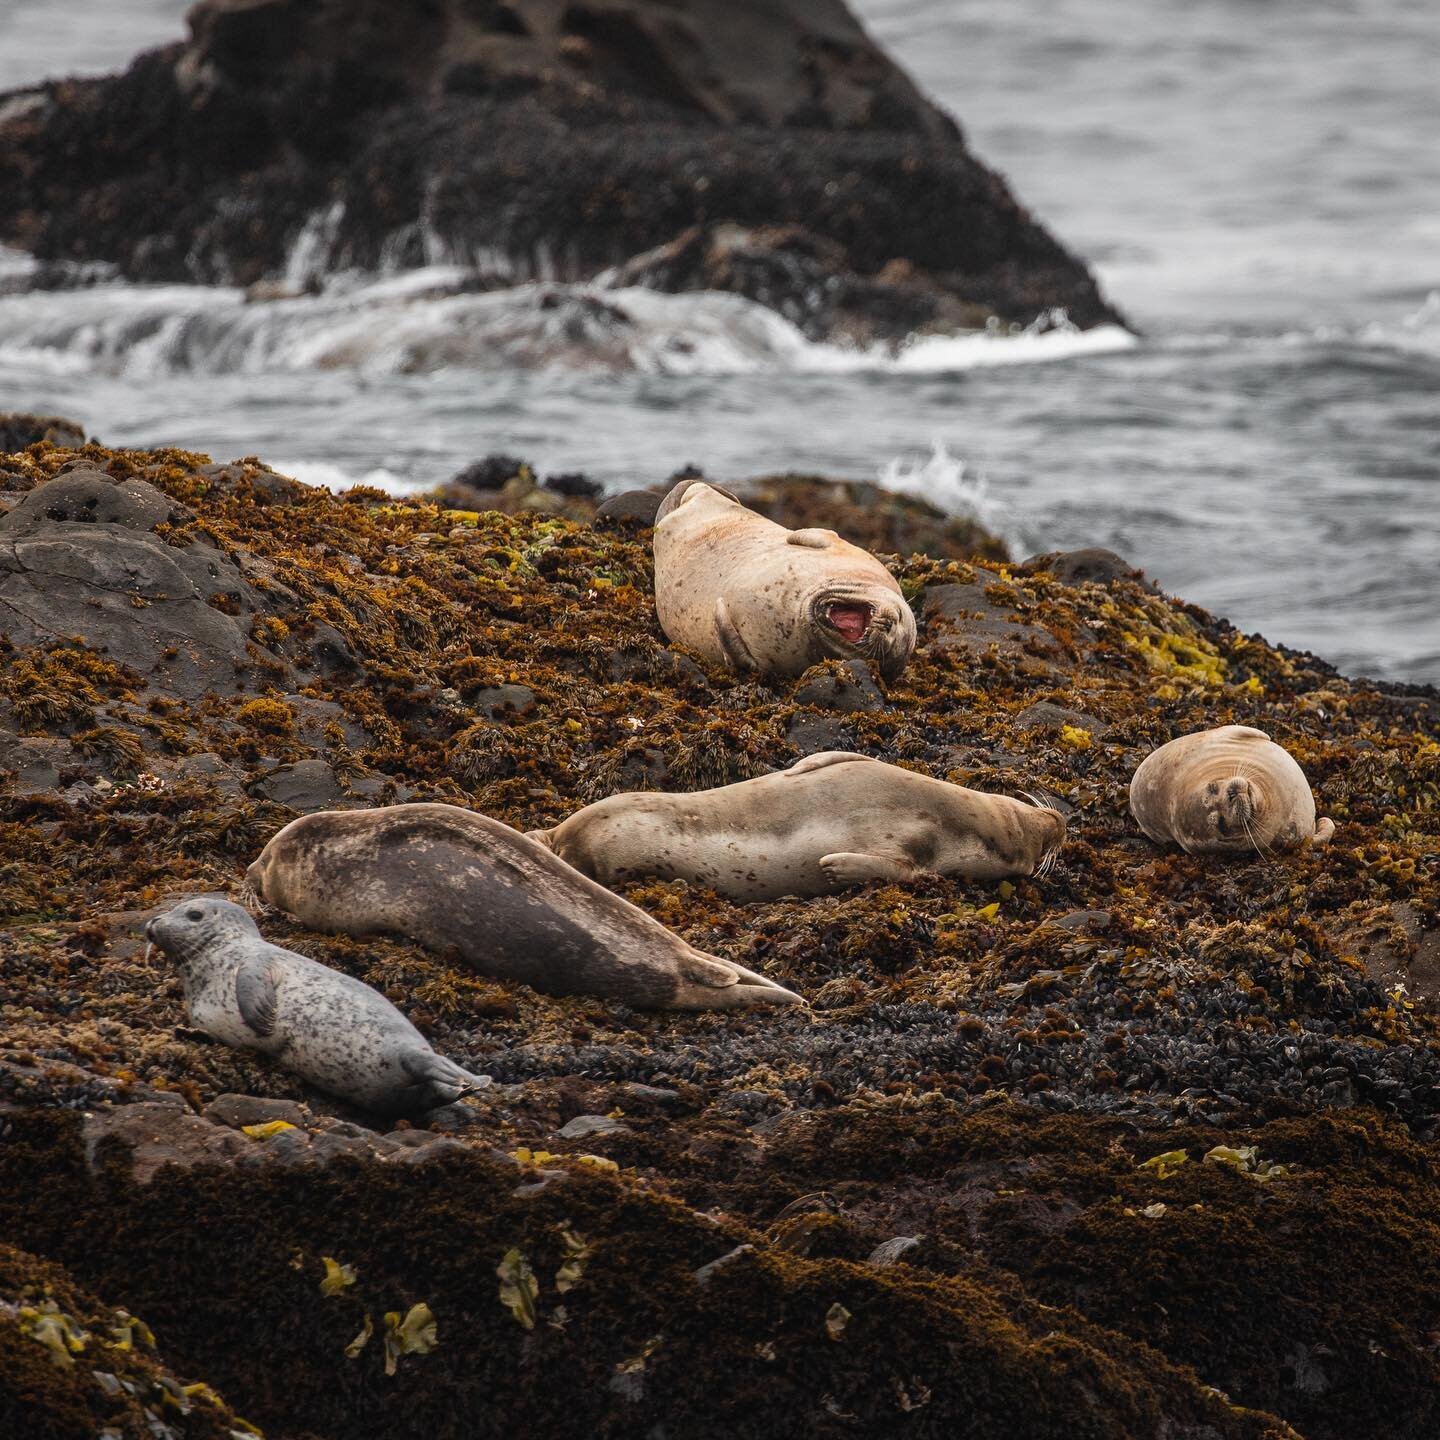 A group of seals is usually called a pod, but it can also be called a &ldquo;plump&rdquo; 

A plump of seals.